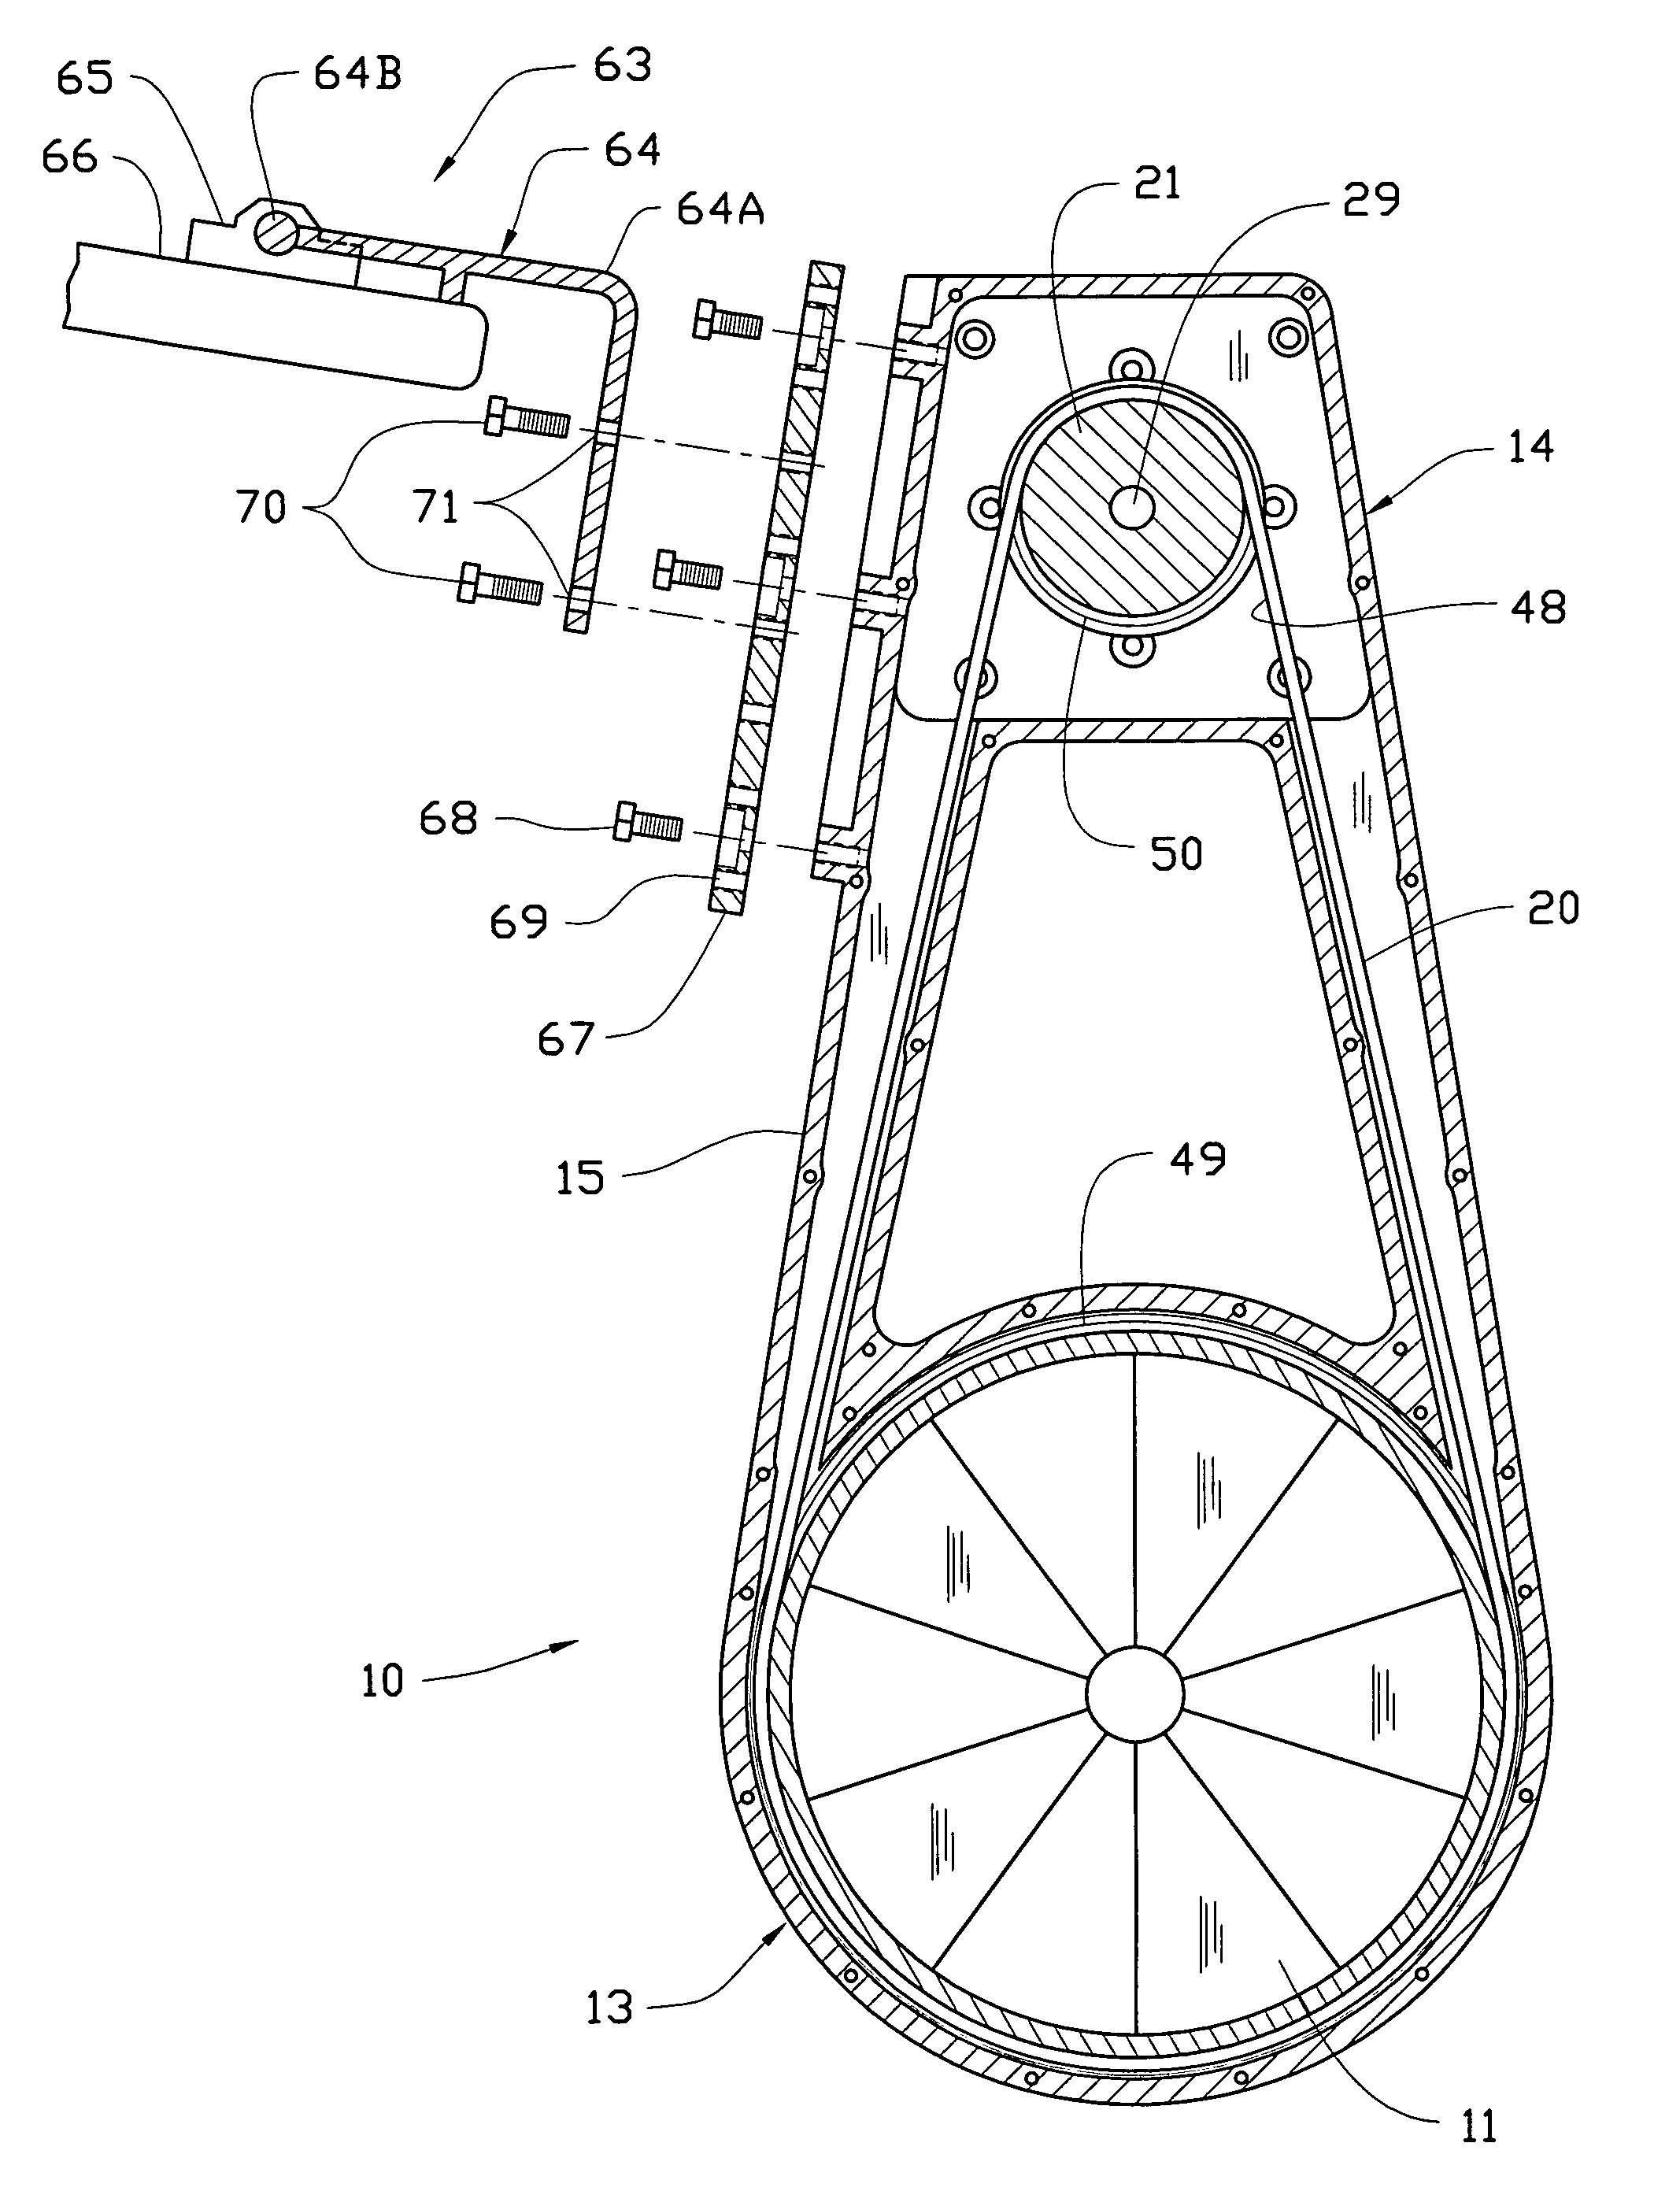 Lateral thruster unit for marine vessels